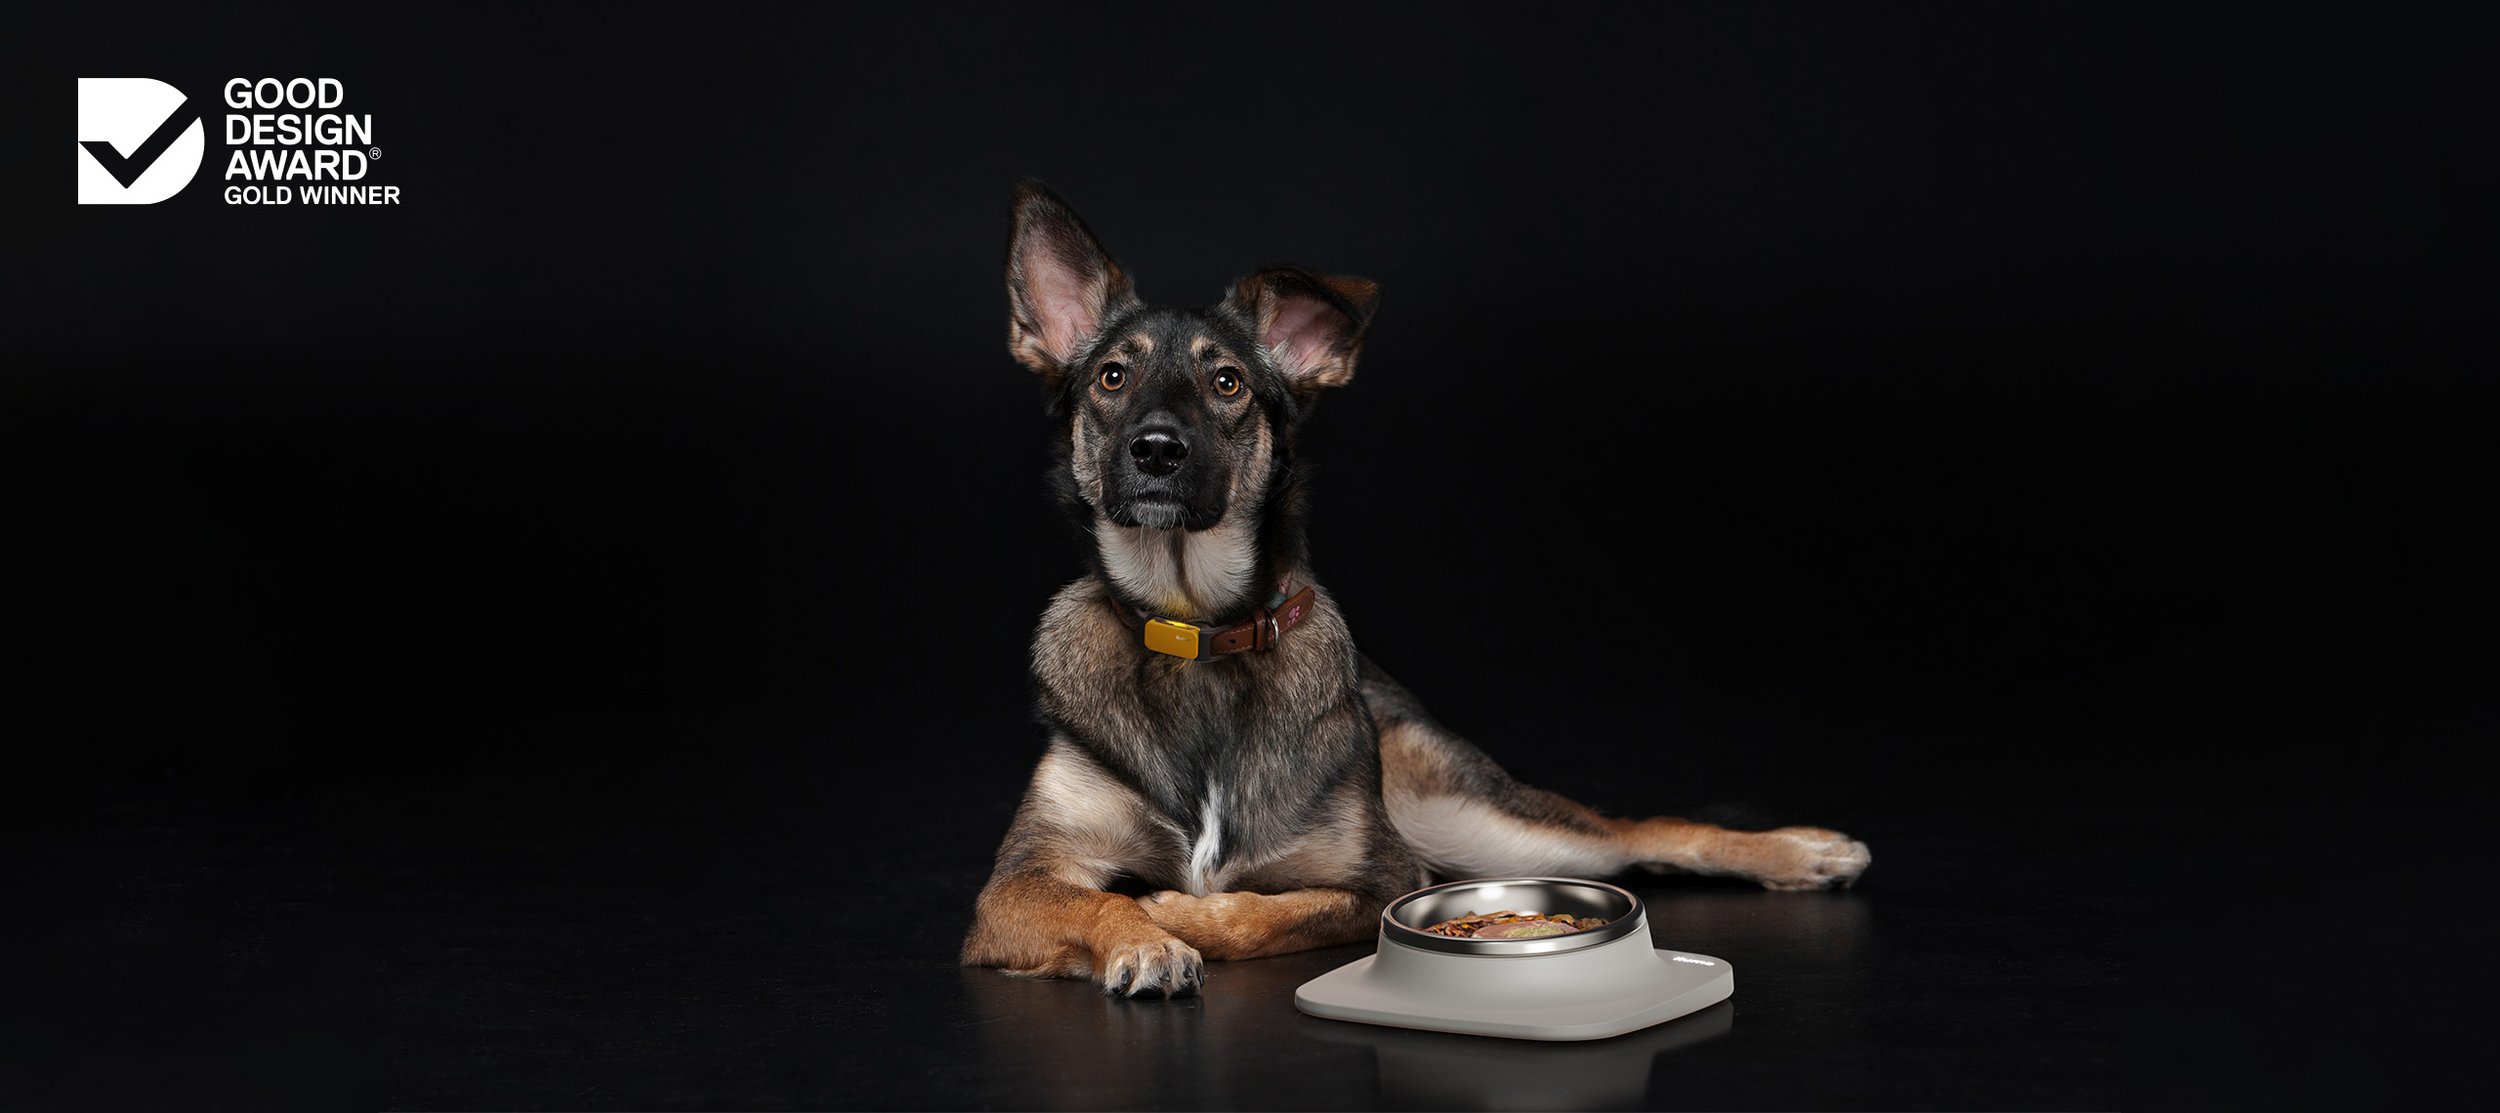 Ilume Dog Health + Wellbeing Technology Suite - Tracker and Smart Bowl - Good Design Gold Award 2022.jpg